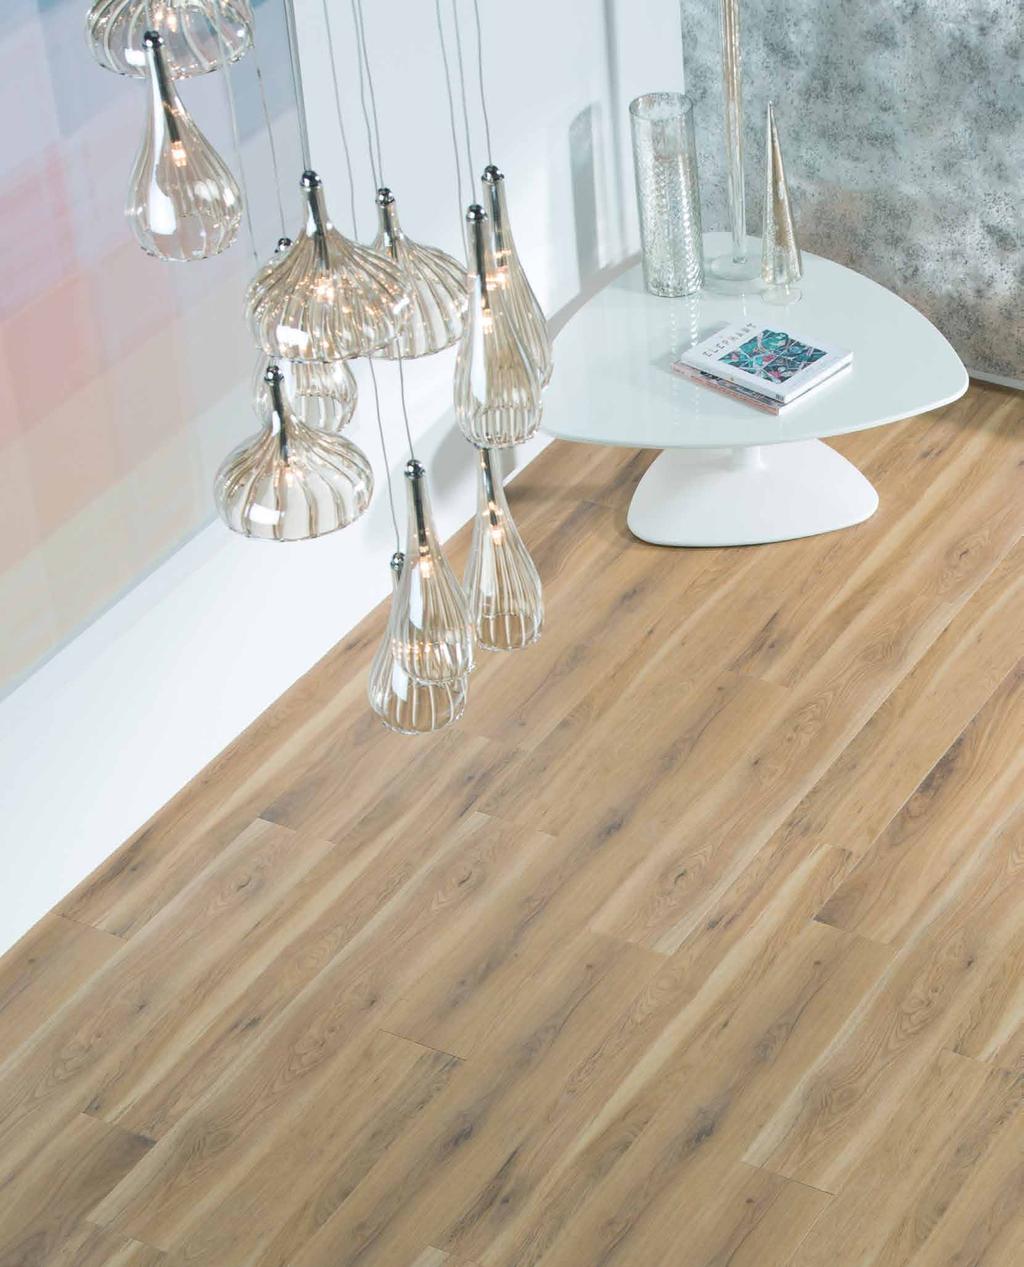 EDEN OAK The look and feel of natural grain contrasts with an atmospheric